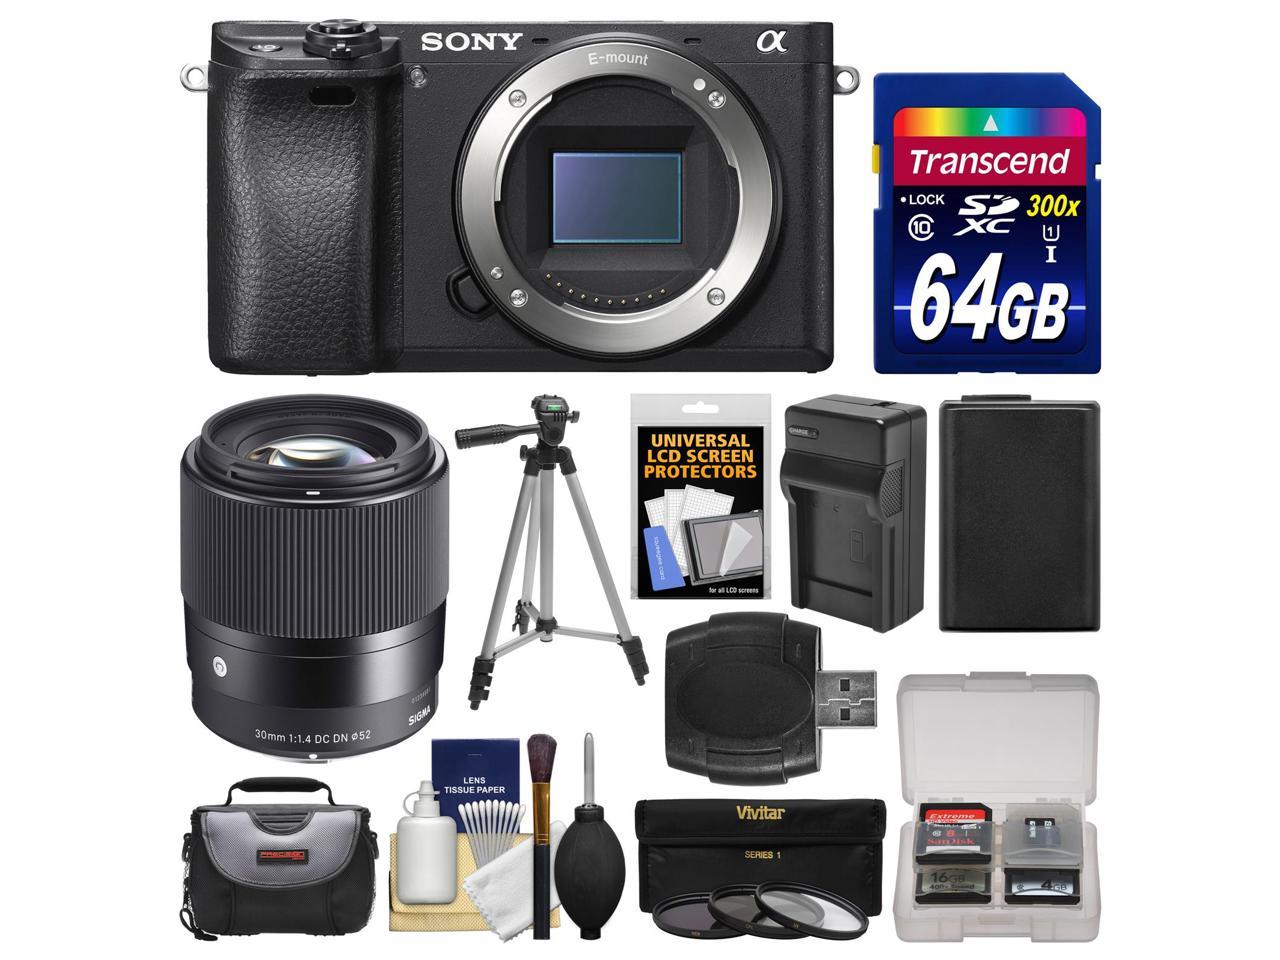 Sony Alpha A6300 4K Wi-Fi Digital Camera Body with Sigma 30mm f/1.4 Lens + 64GB Card + Case + Battery & Charger + Tripod + Filters Kit